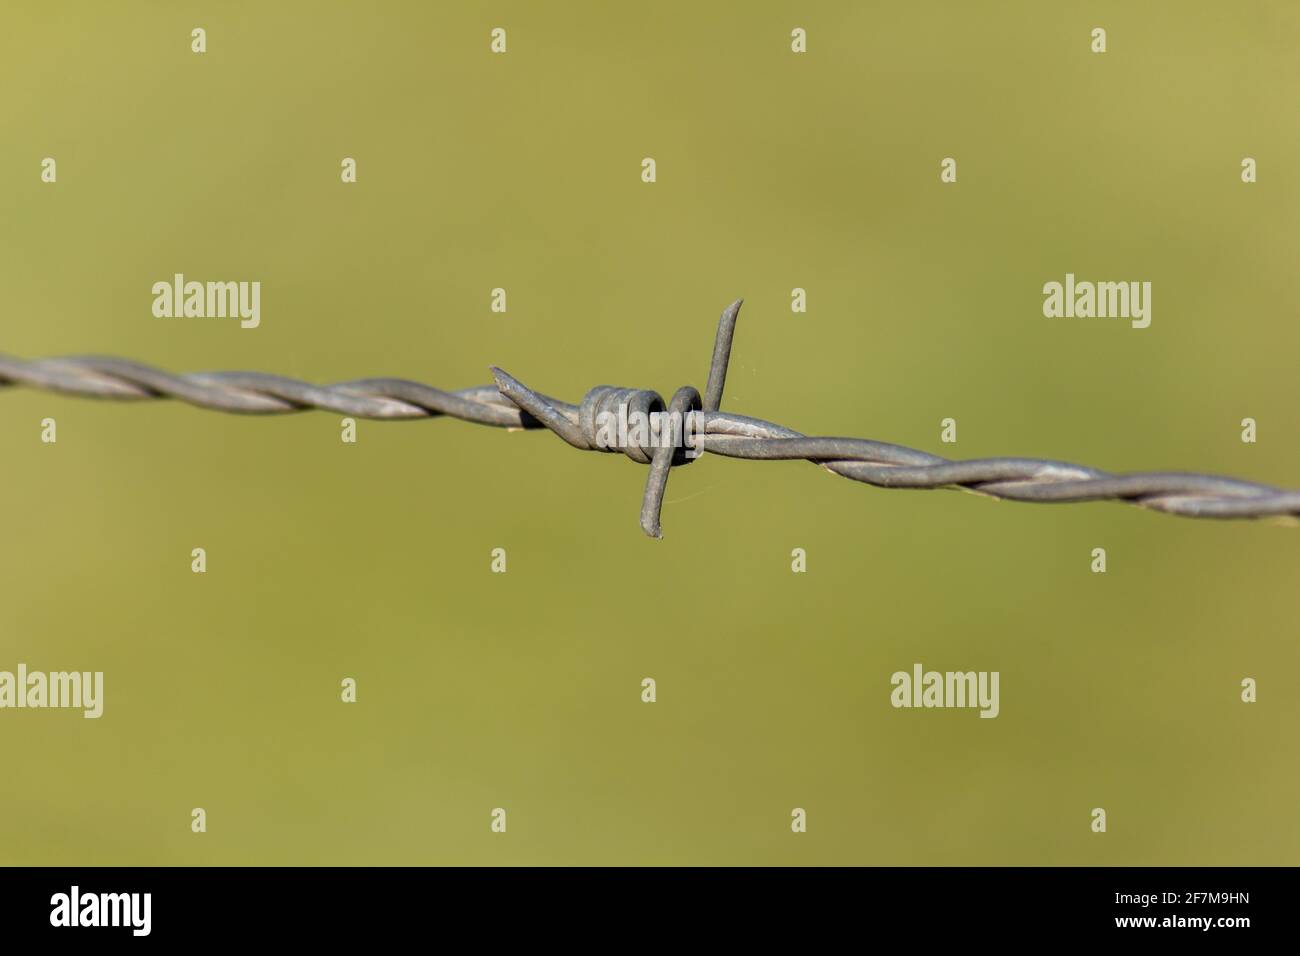 Steel barbed wire close up isolated on green background Stock Photo